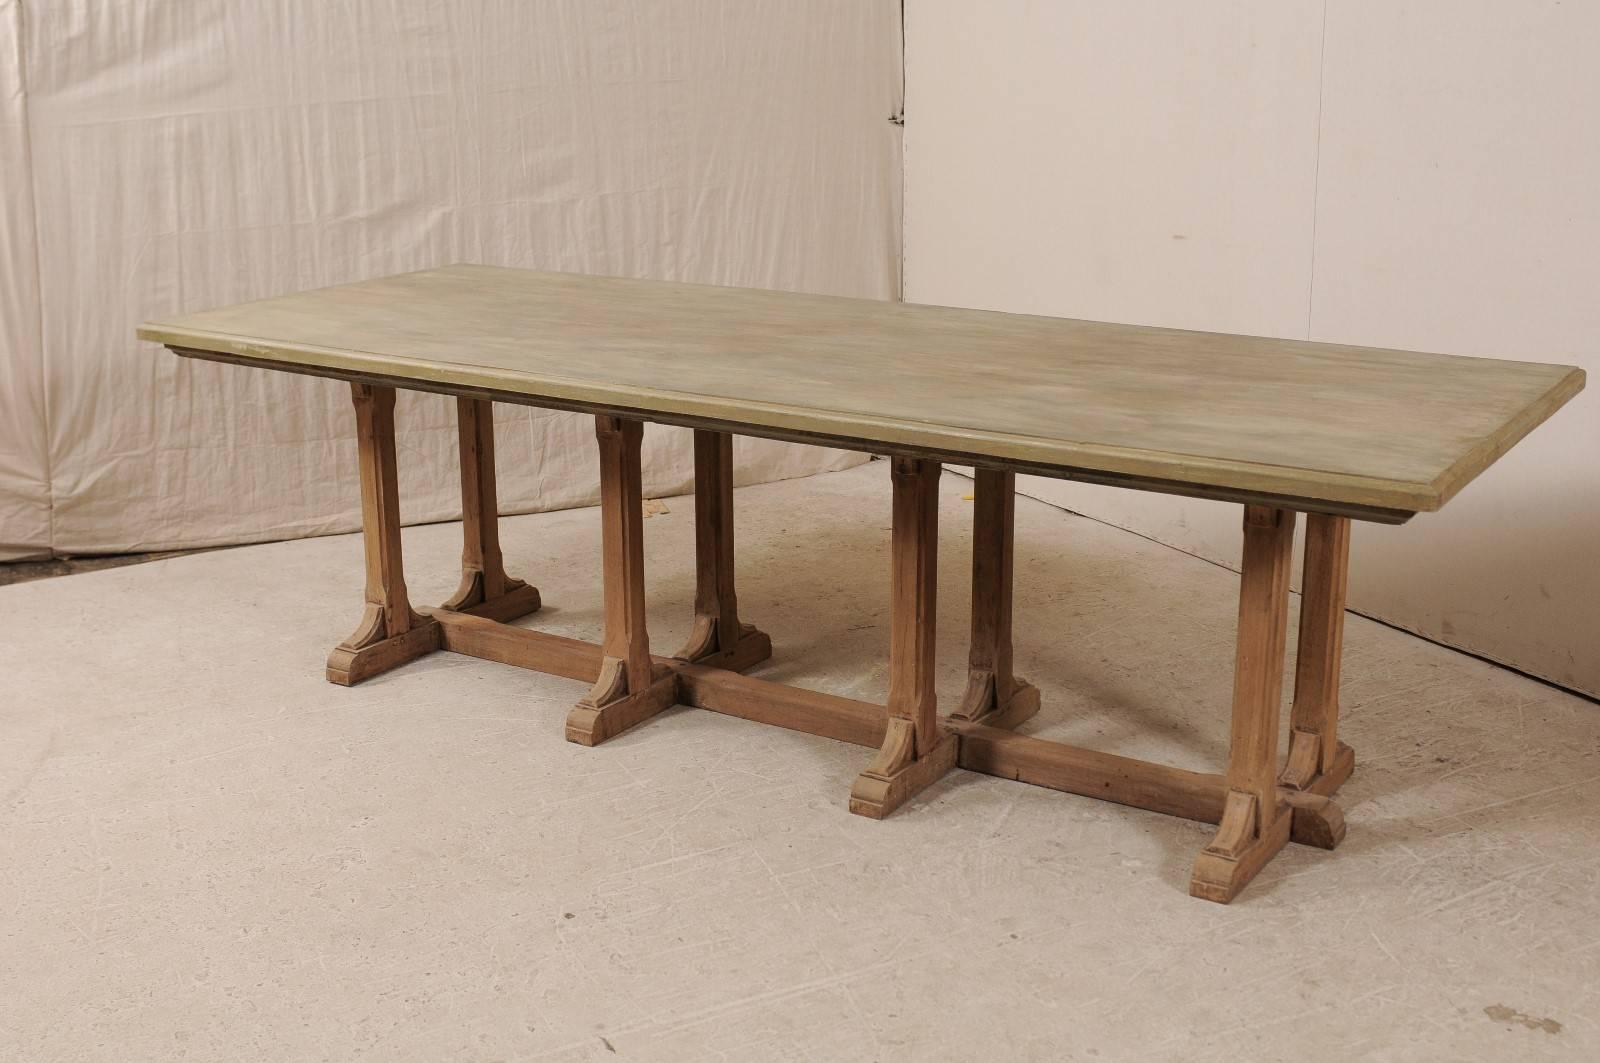 Reclaimed Wood Vintage Trestle Dining Table of Nice Old Indian Teak Wood and Subtle Painted Top